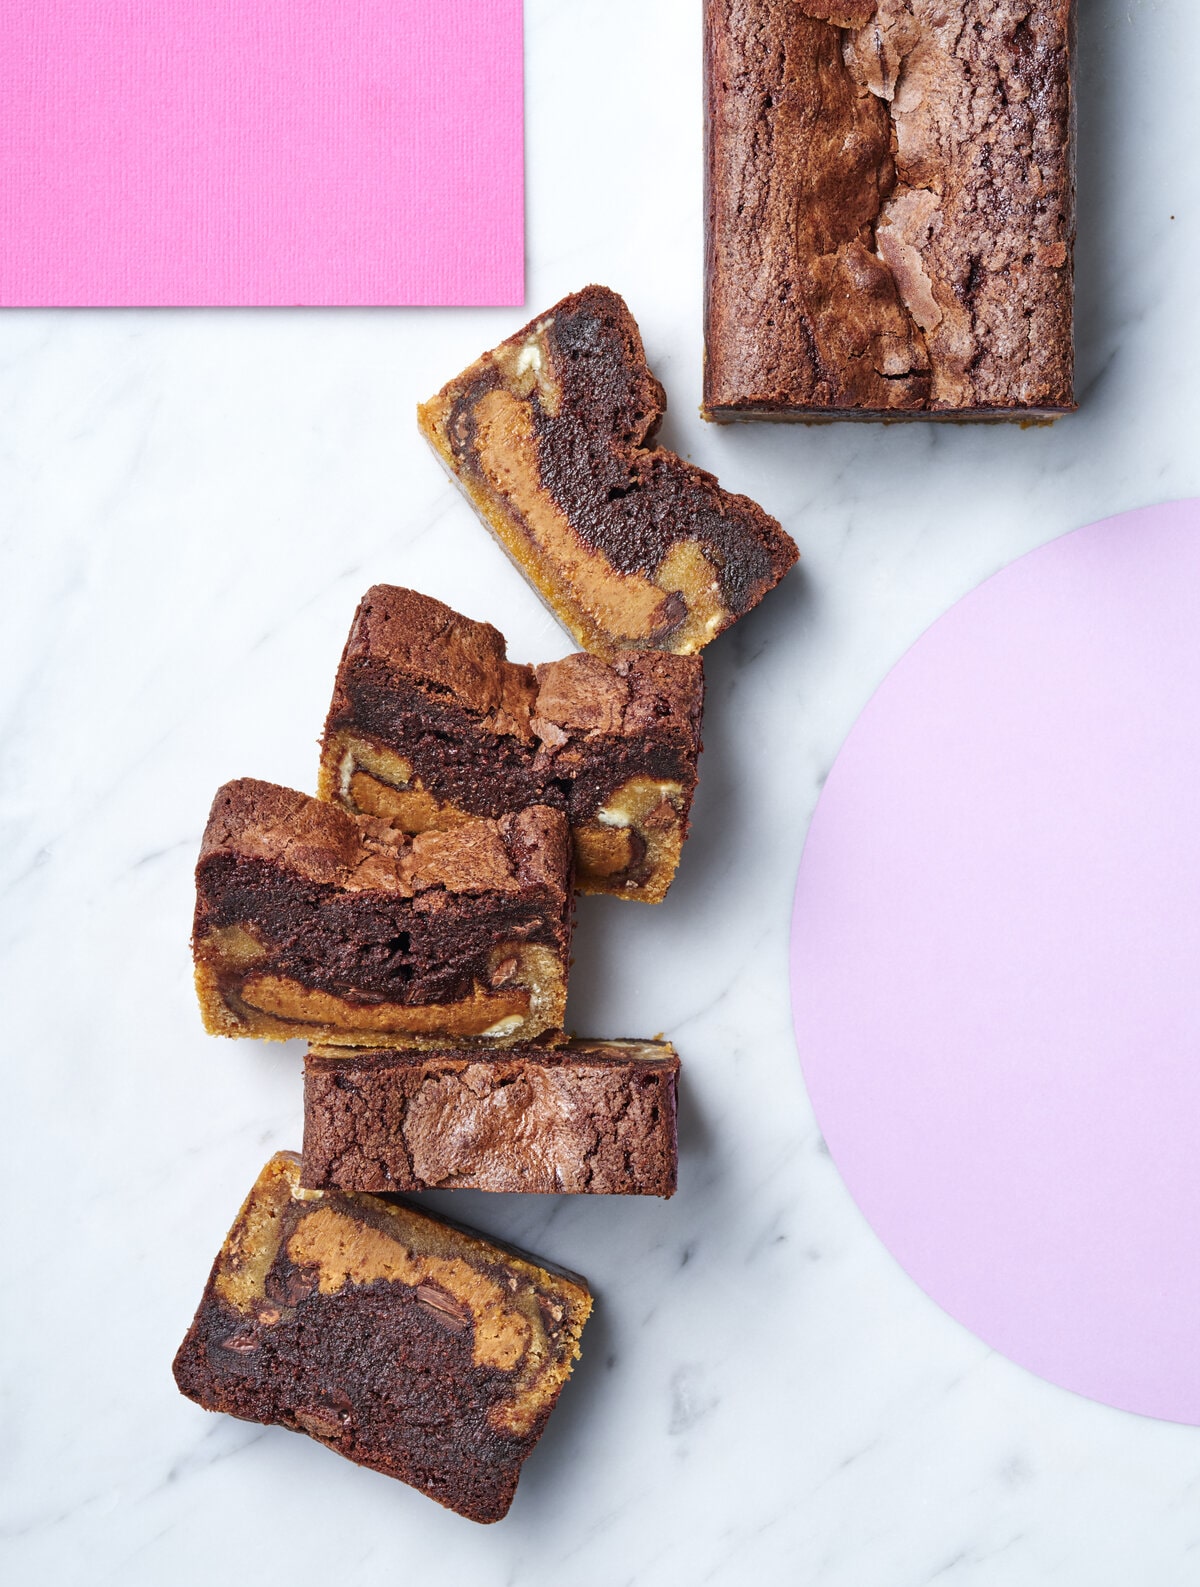 5 pieces of the biscoff cookie brownie laid out in a trail in the centre of the page with the remaining loaf in the top right corner.